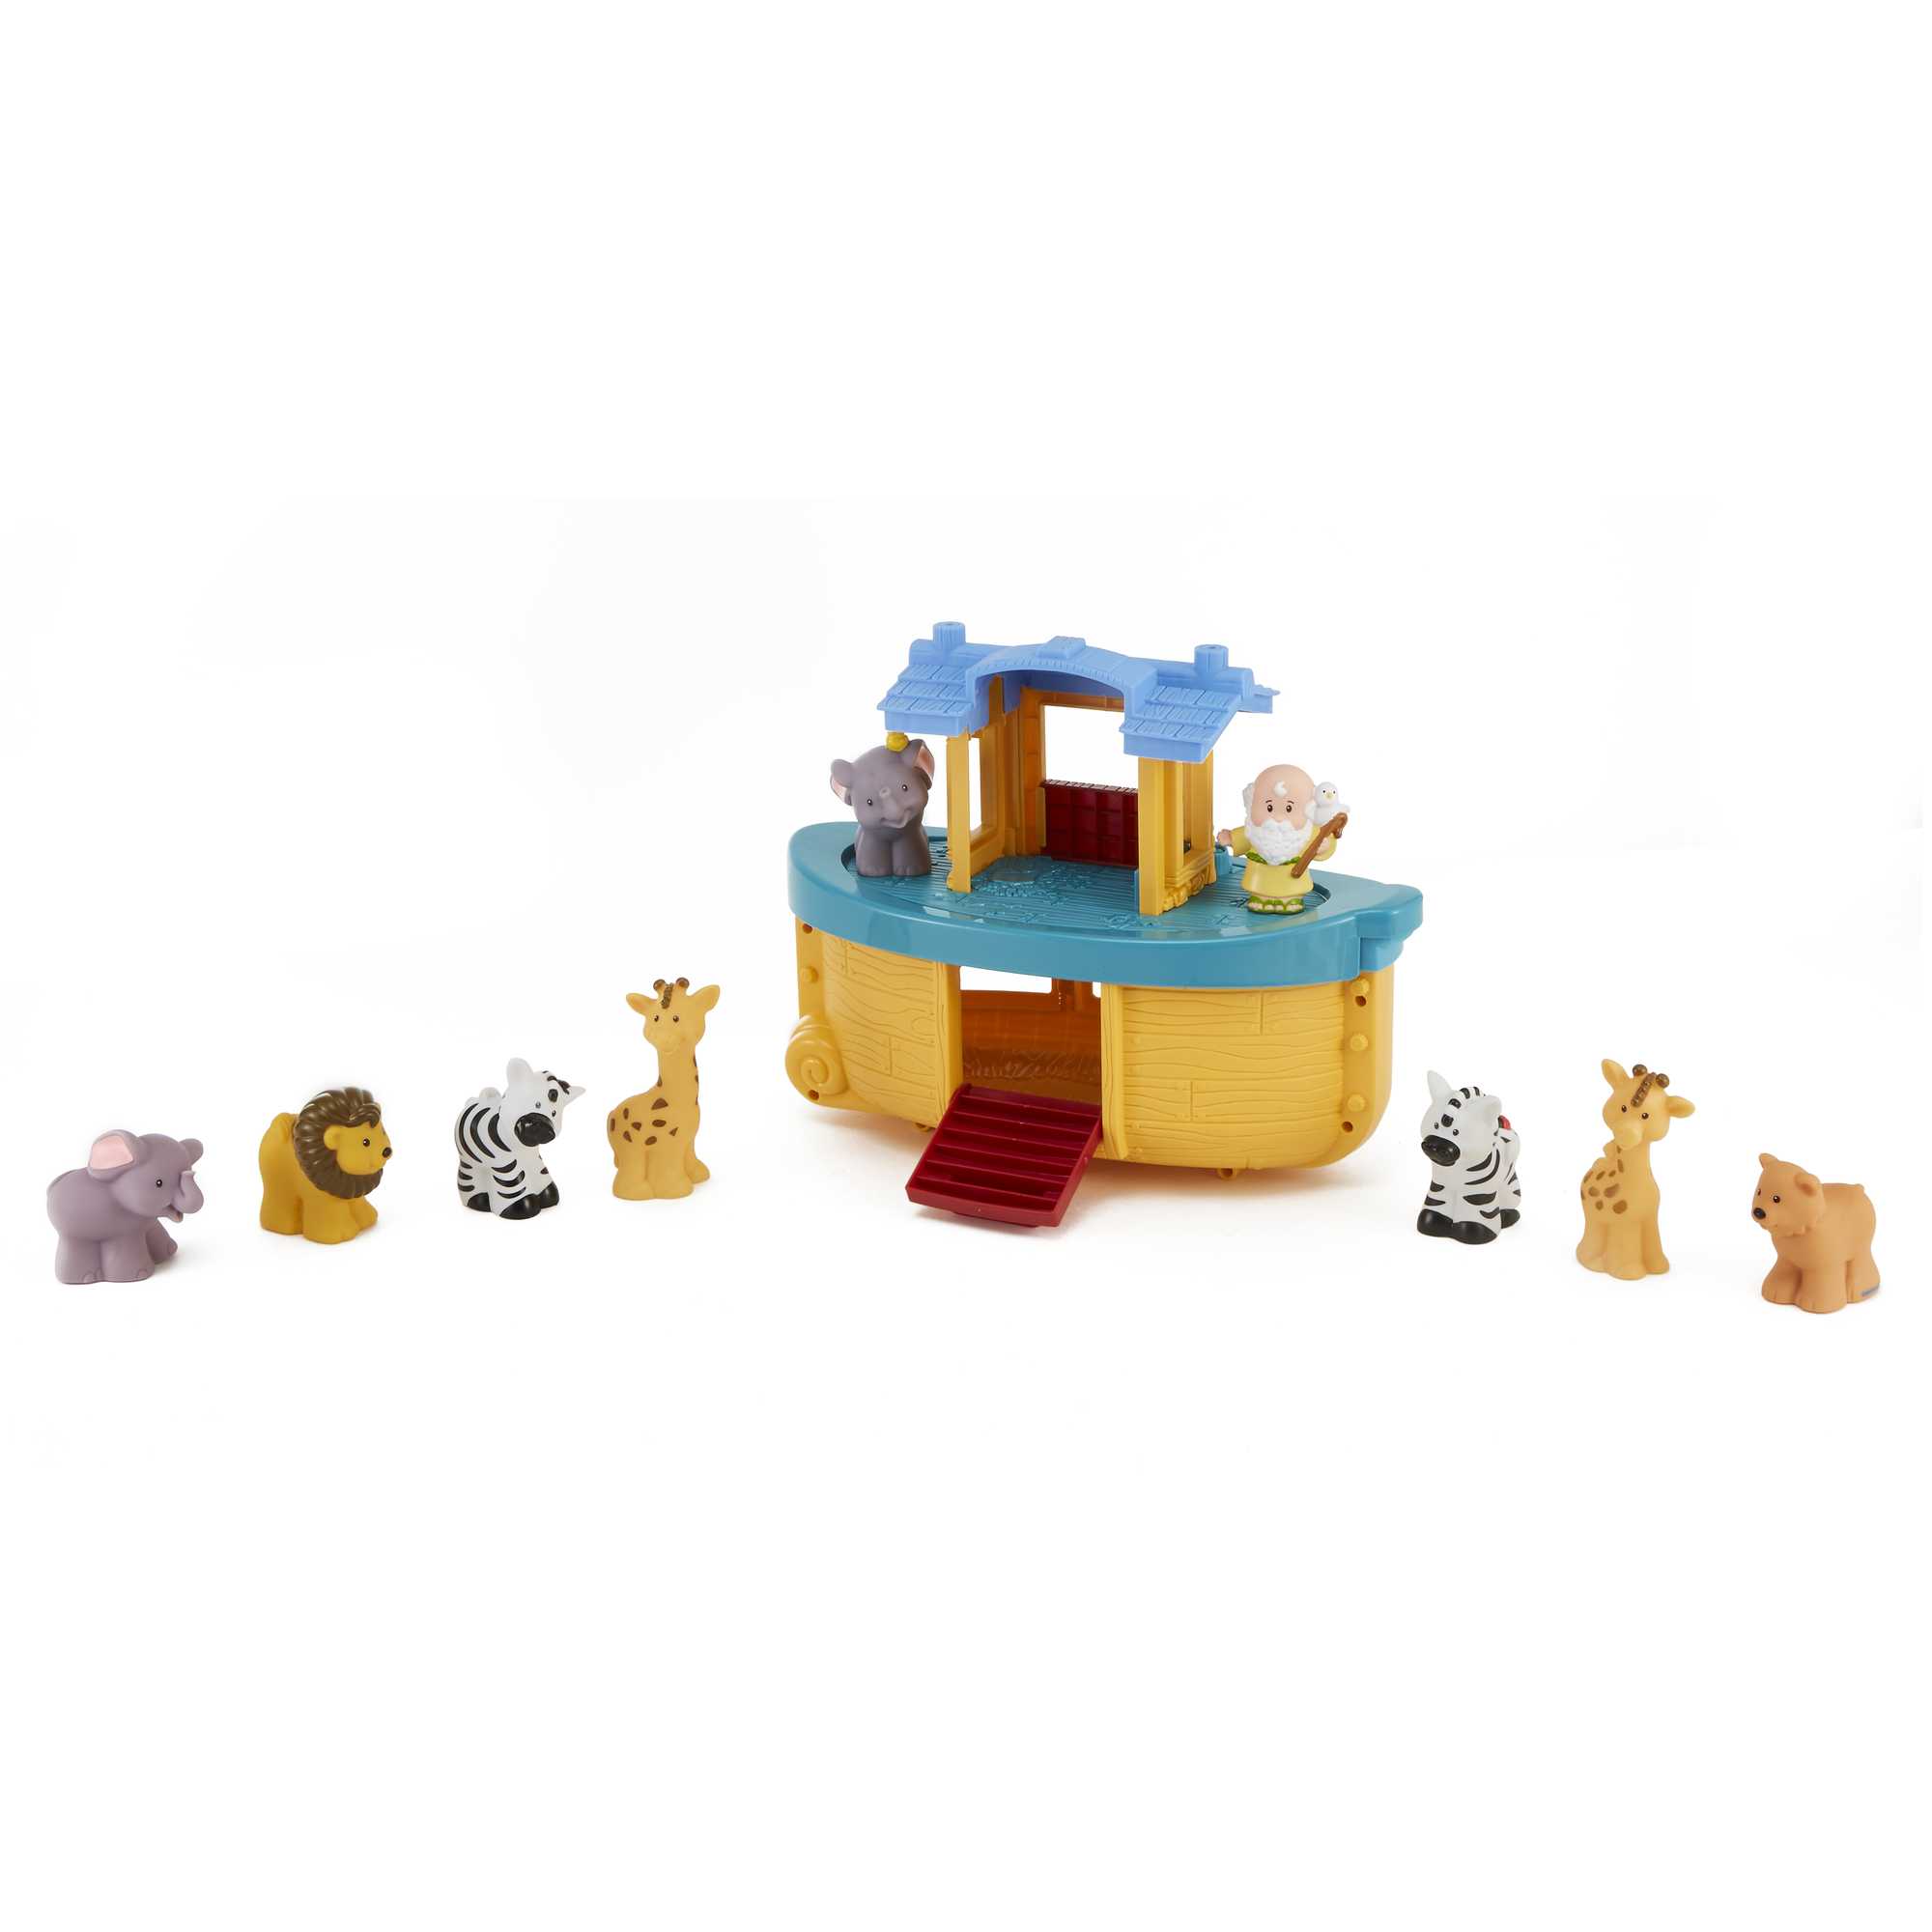 Fisher-Price Little People 10-Piece Animal Pack Figure Set for Toddler  Pretend Play